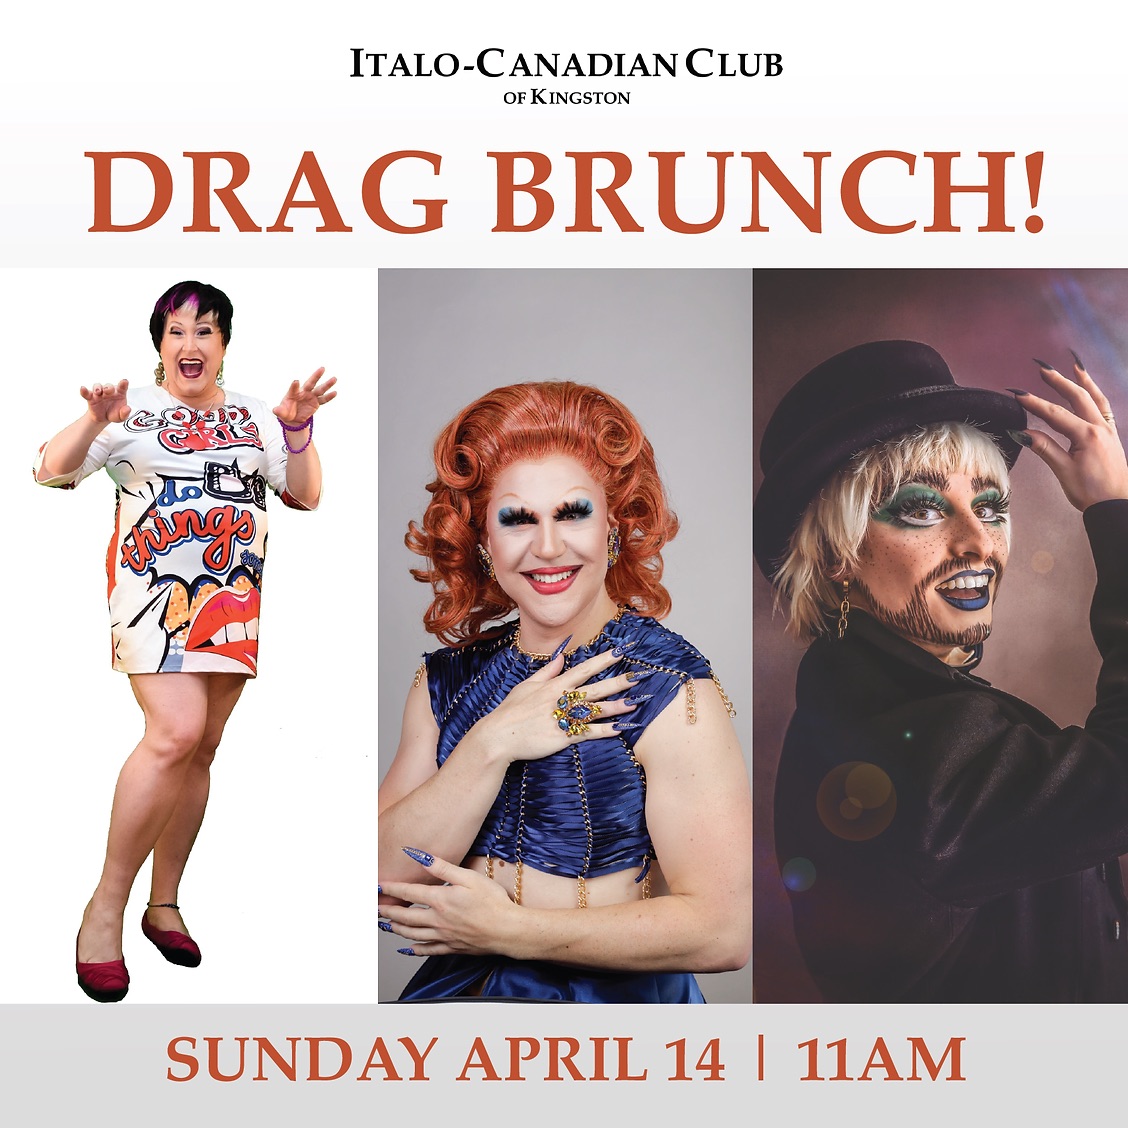 Family Friendly Drag Brunch at the Italo-Canadian Club